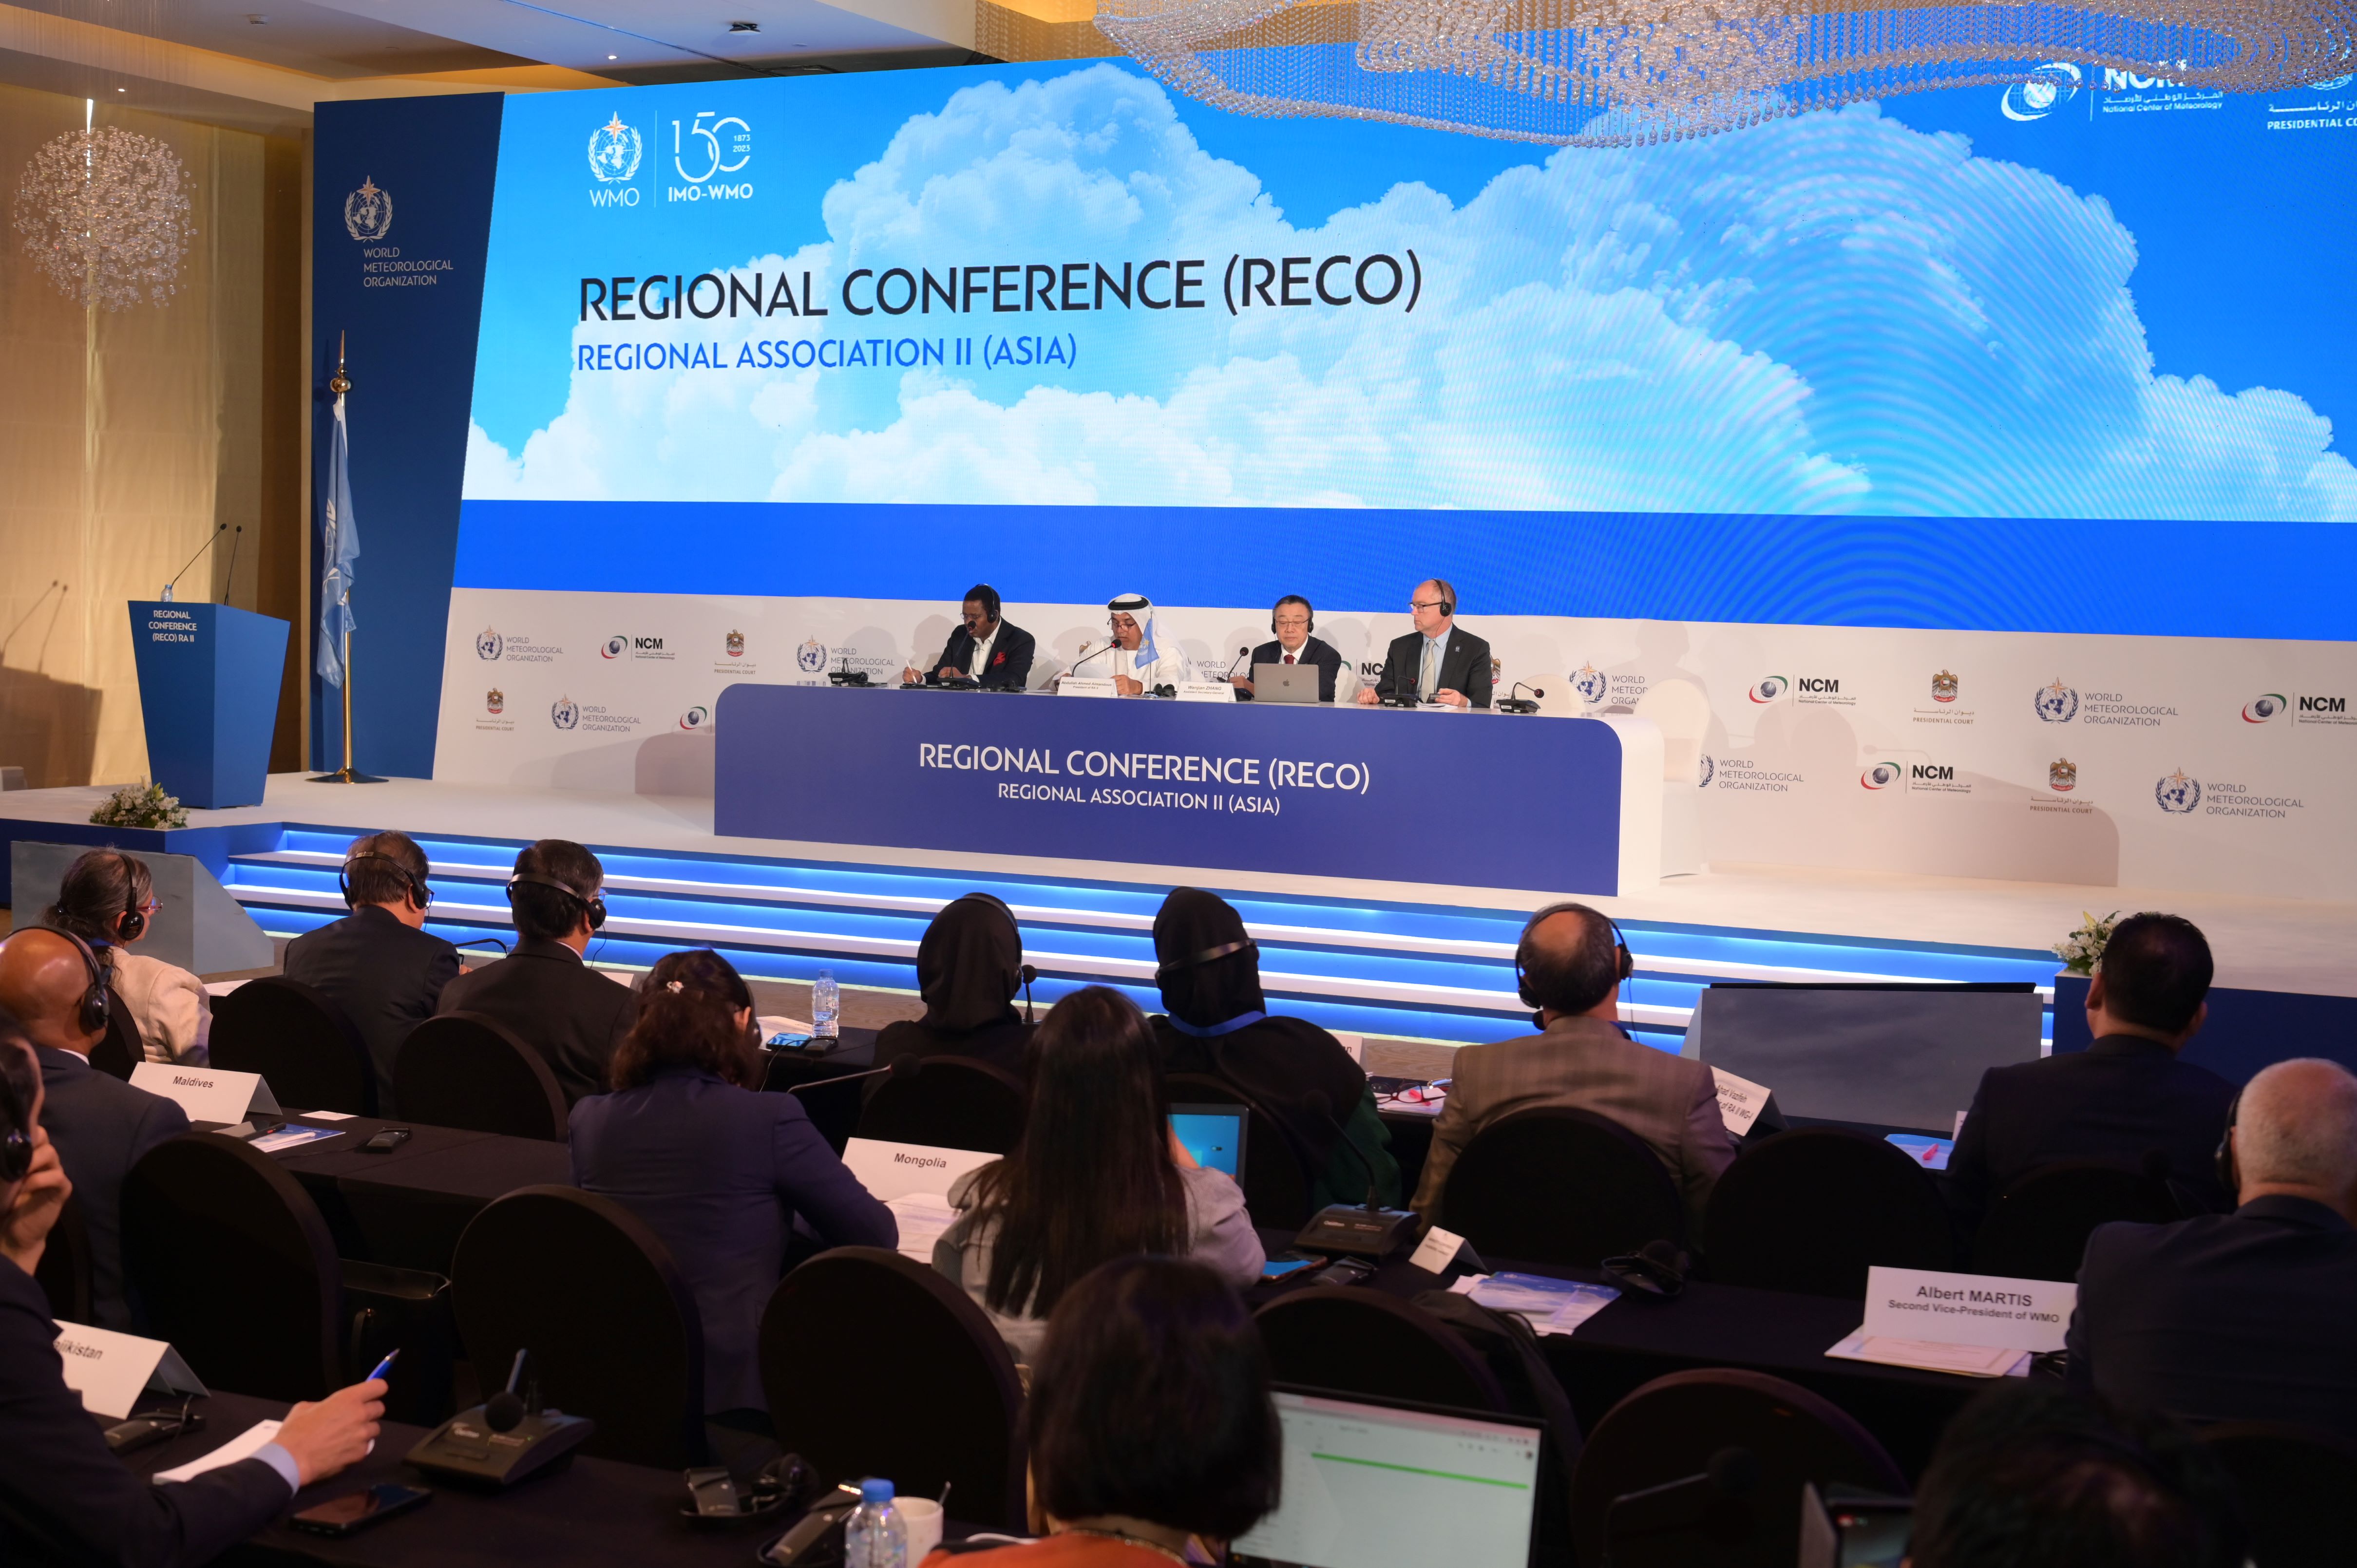 Regional Conference Of WMO’s Regional Association II (Asia) Concludes In Abu Dhabi